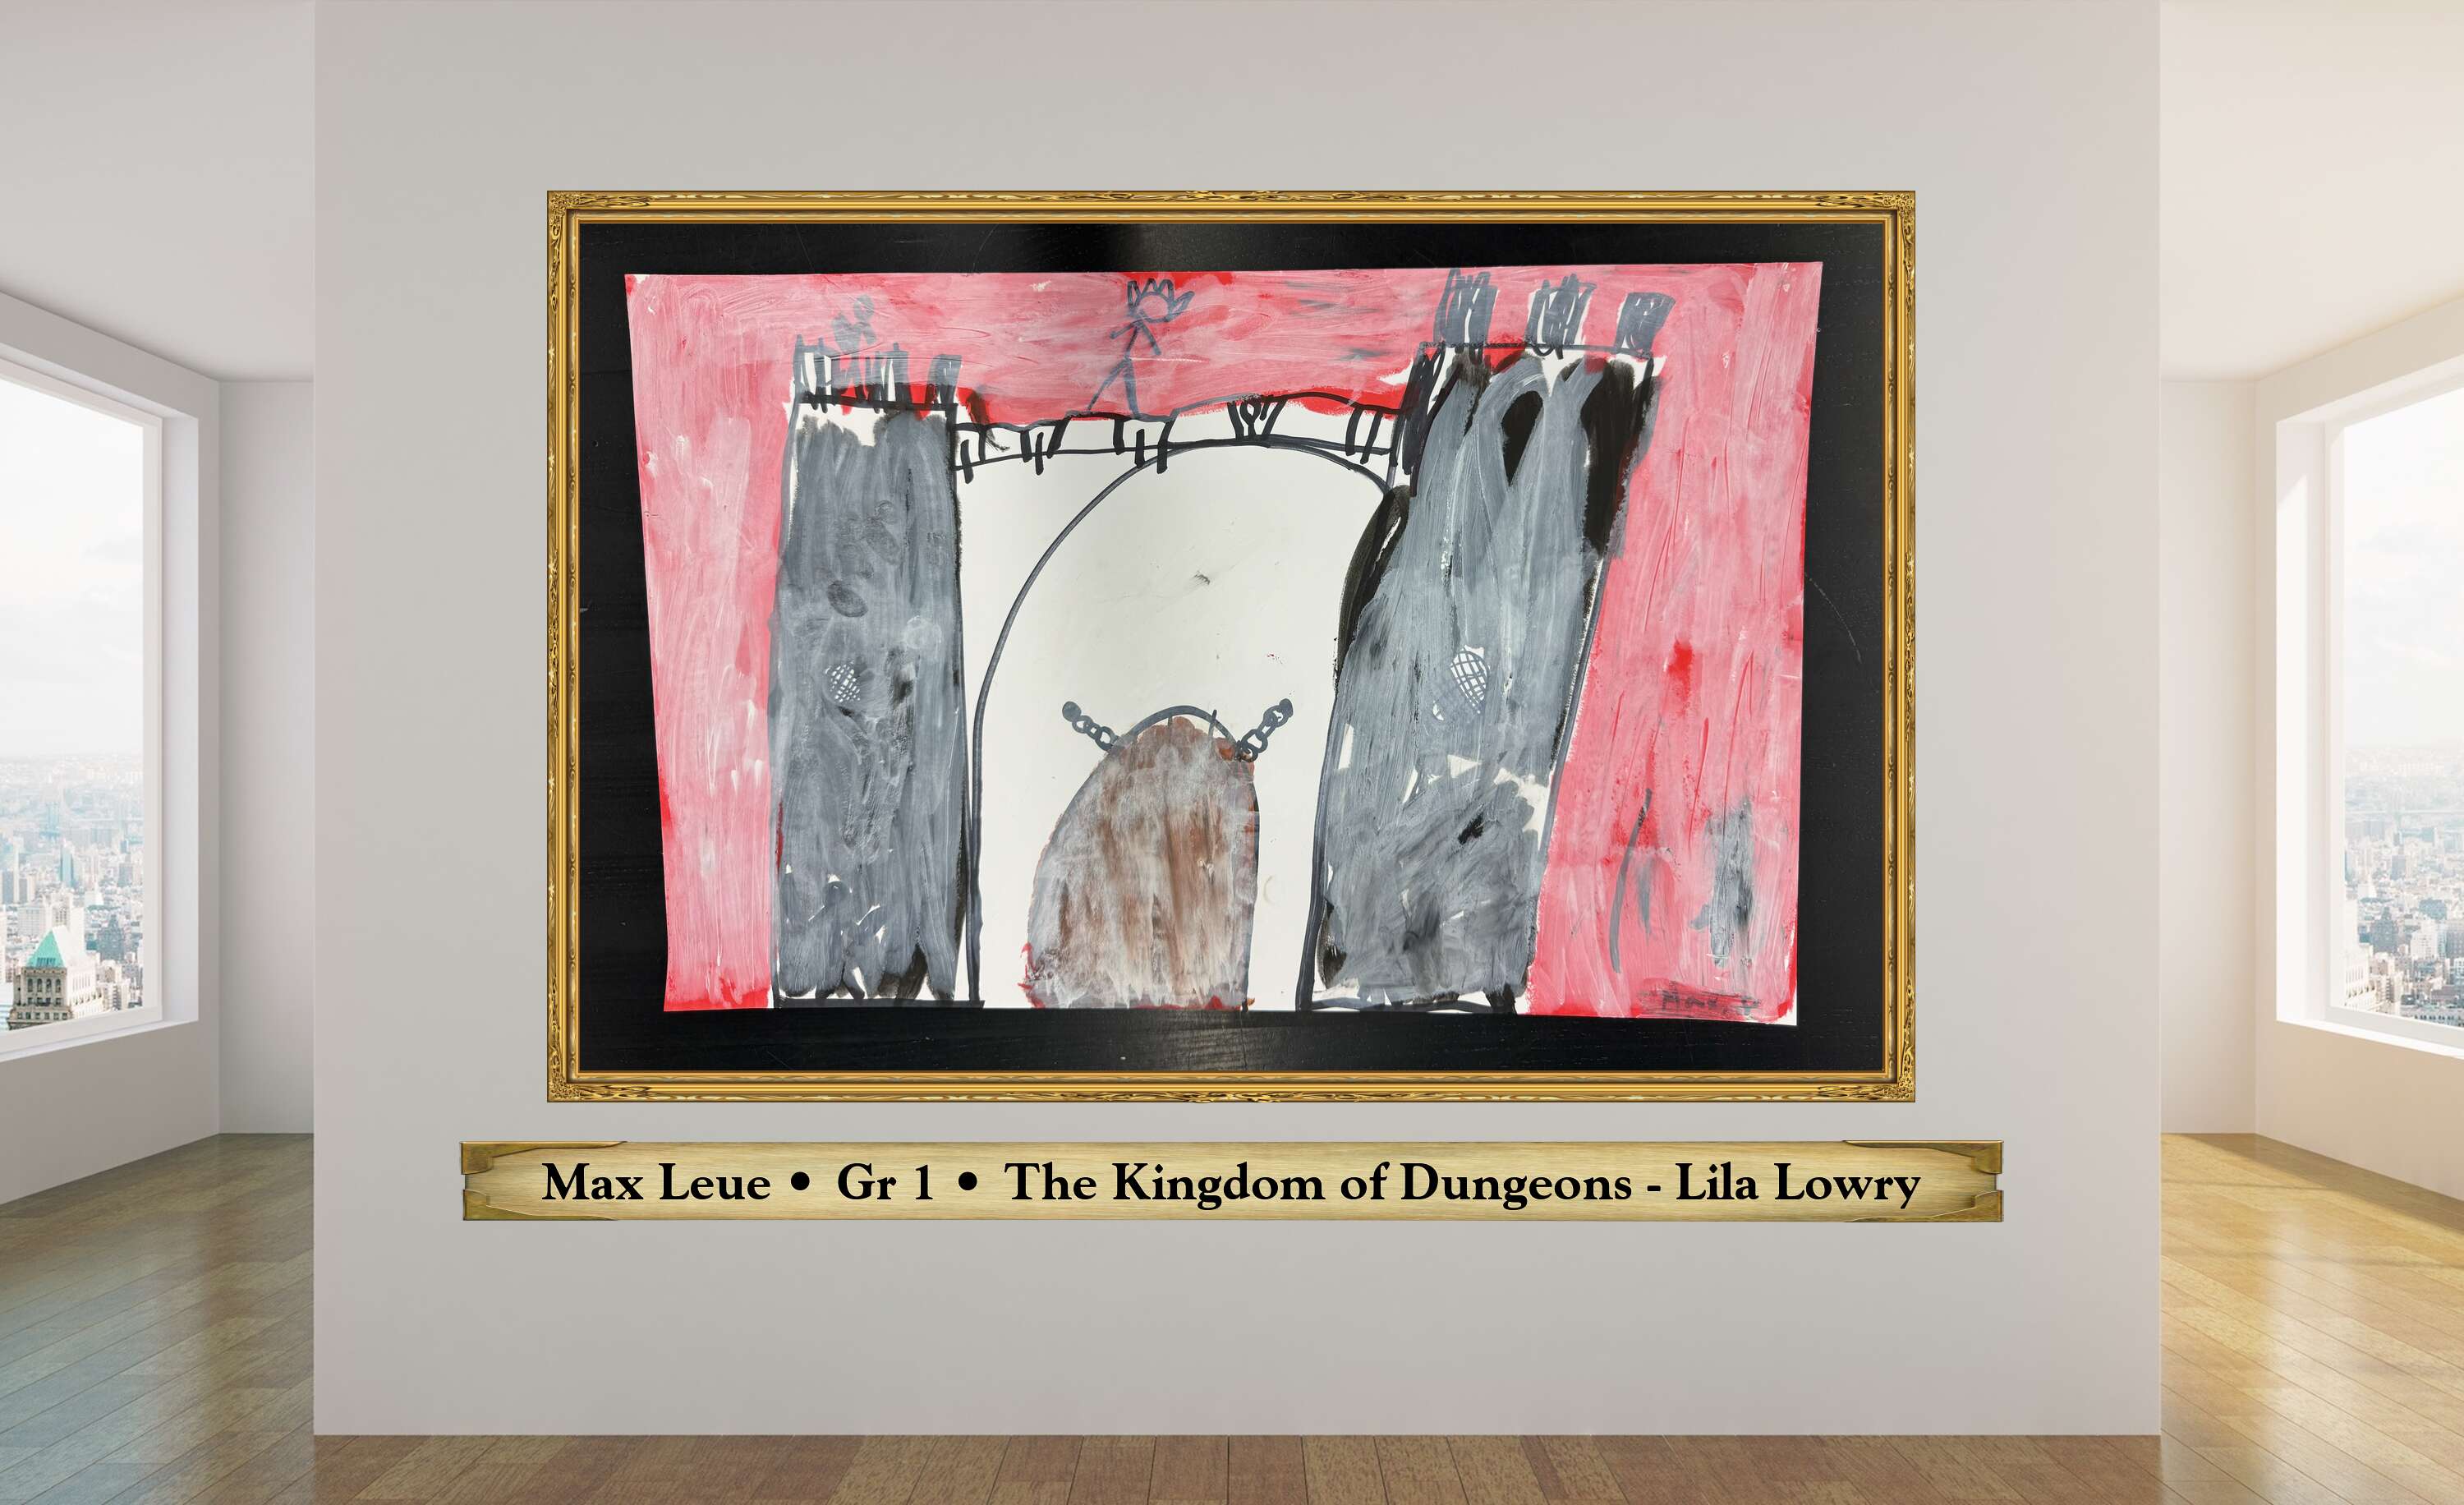 Max Leue • Gr 1 • The Kingdom of Dungeons - Lila Lowry